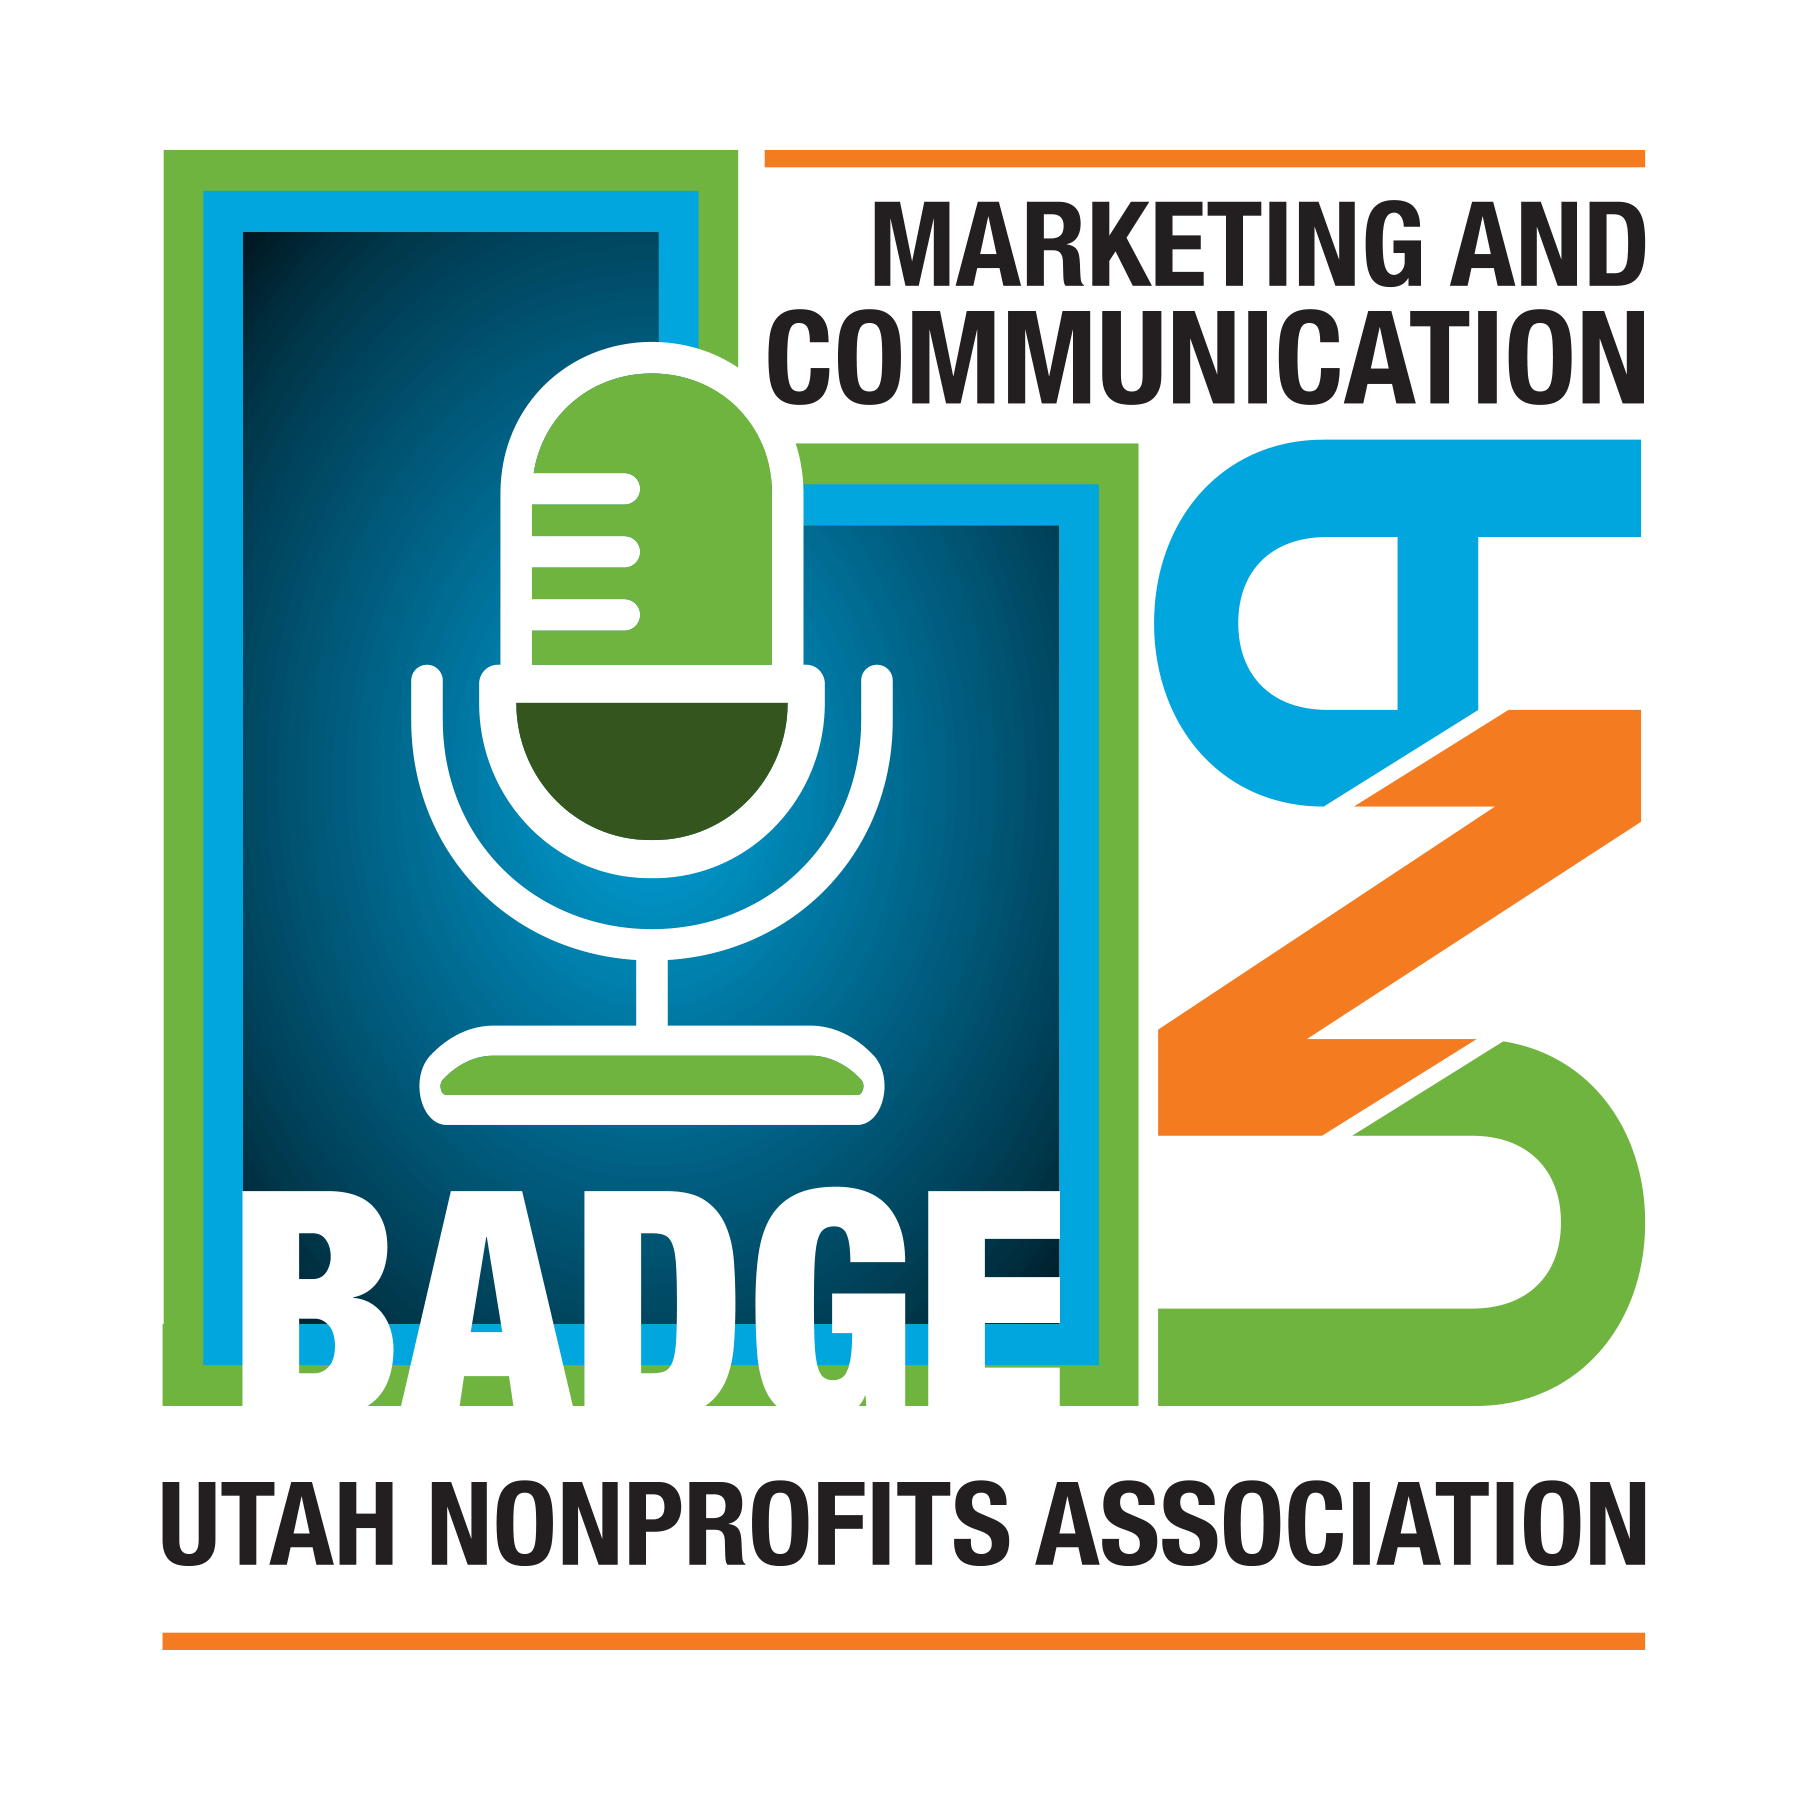 UNA Nonprofit Credential Badge for Marketing and Communication